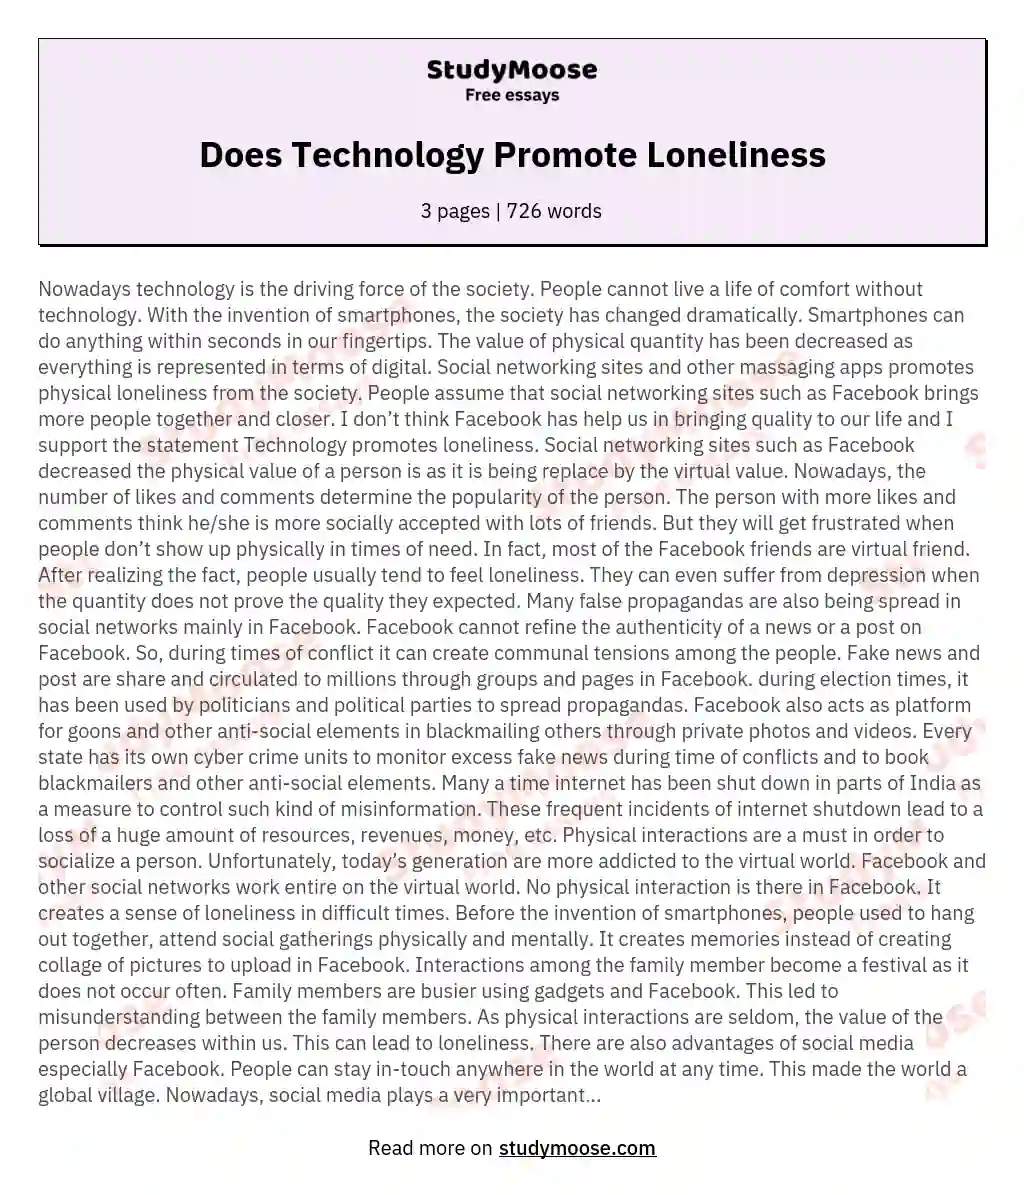 Does Technology Promote Loneliness